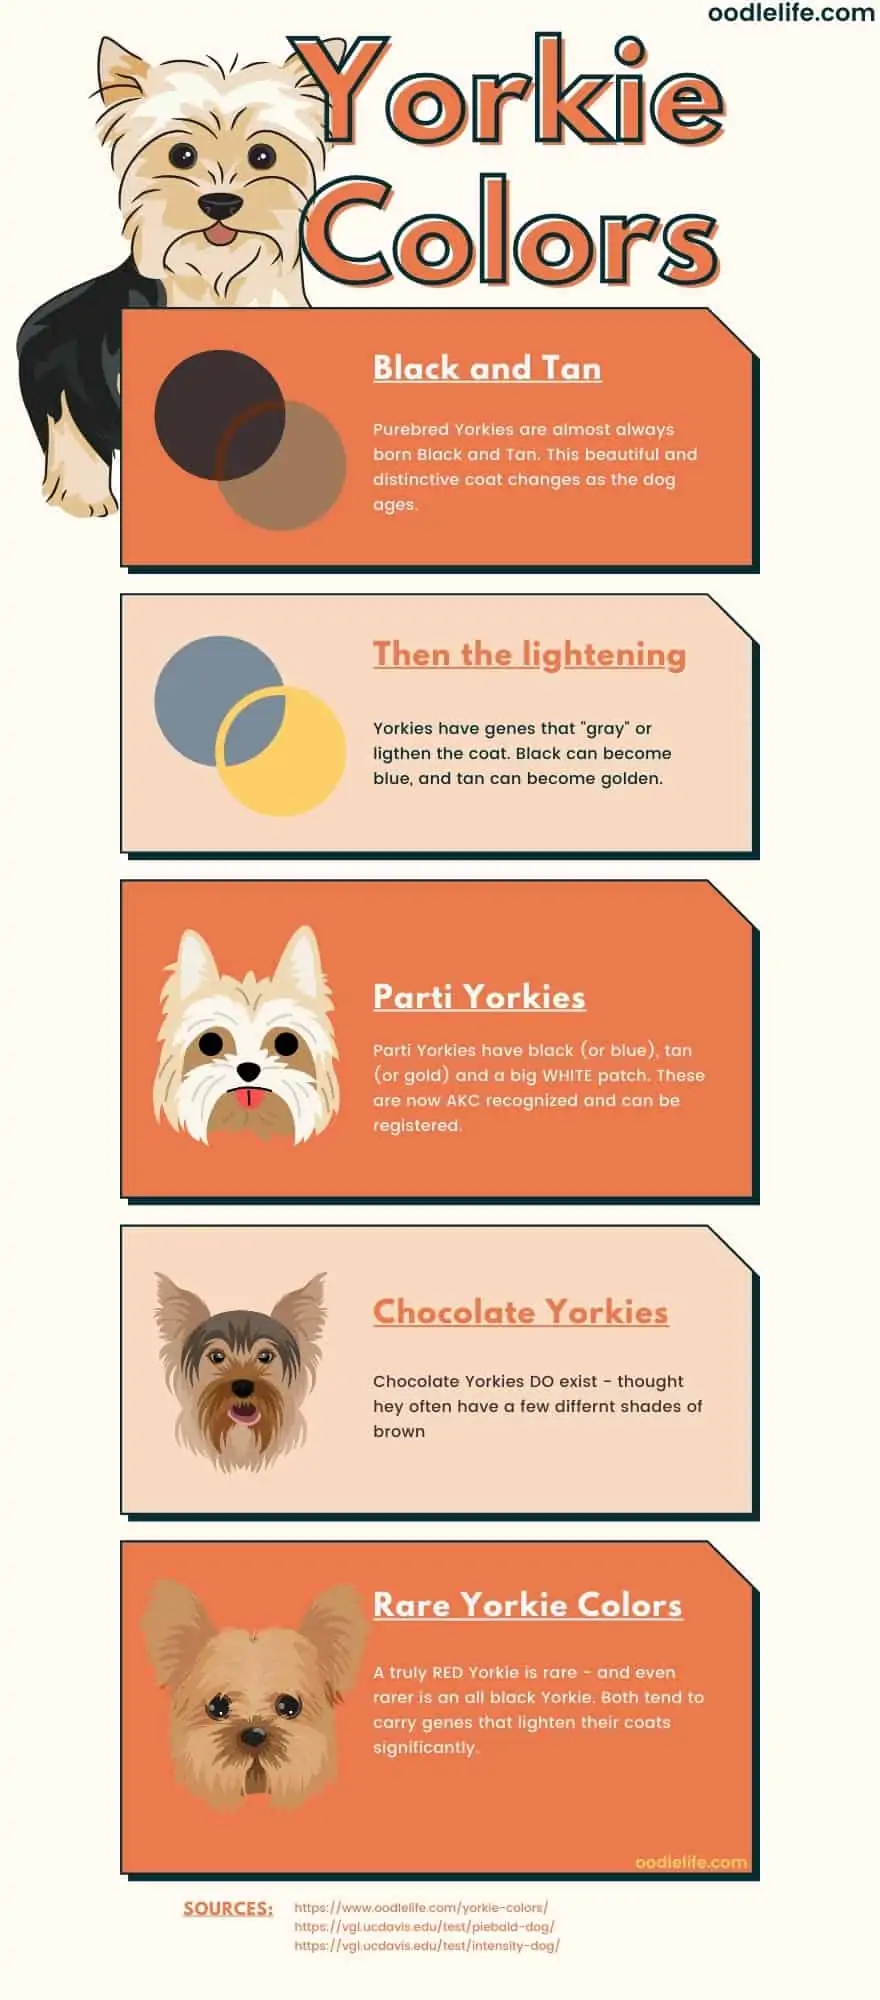 yorkie colors - every coat color explained